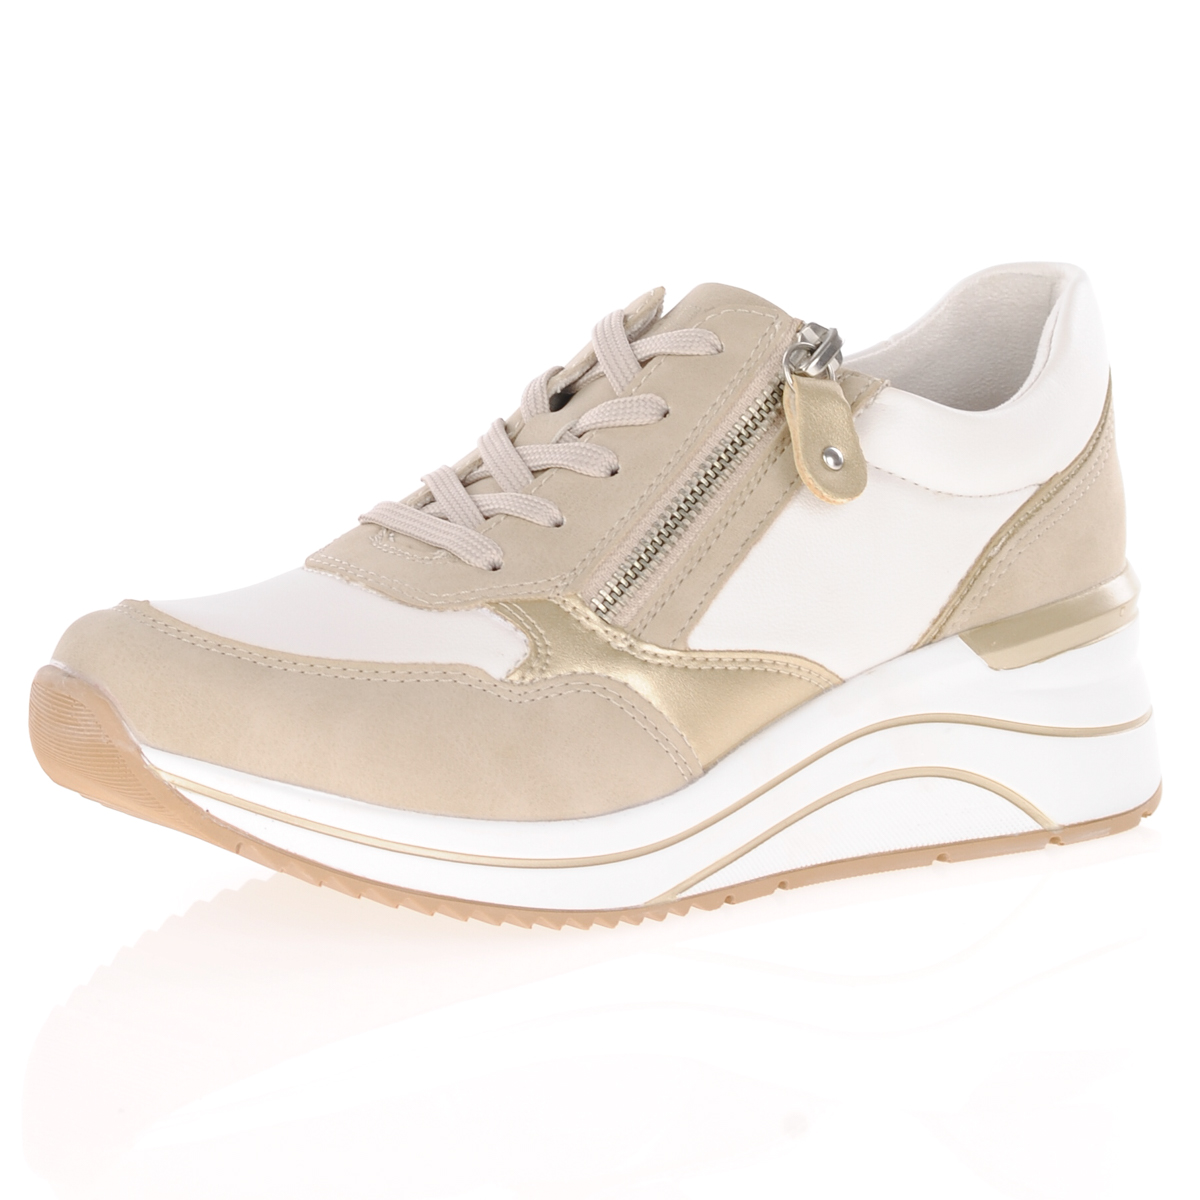 Remonte - Vegan Wedge Trainers Gold Combi - D0T01-80, The Shoe Horn